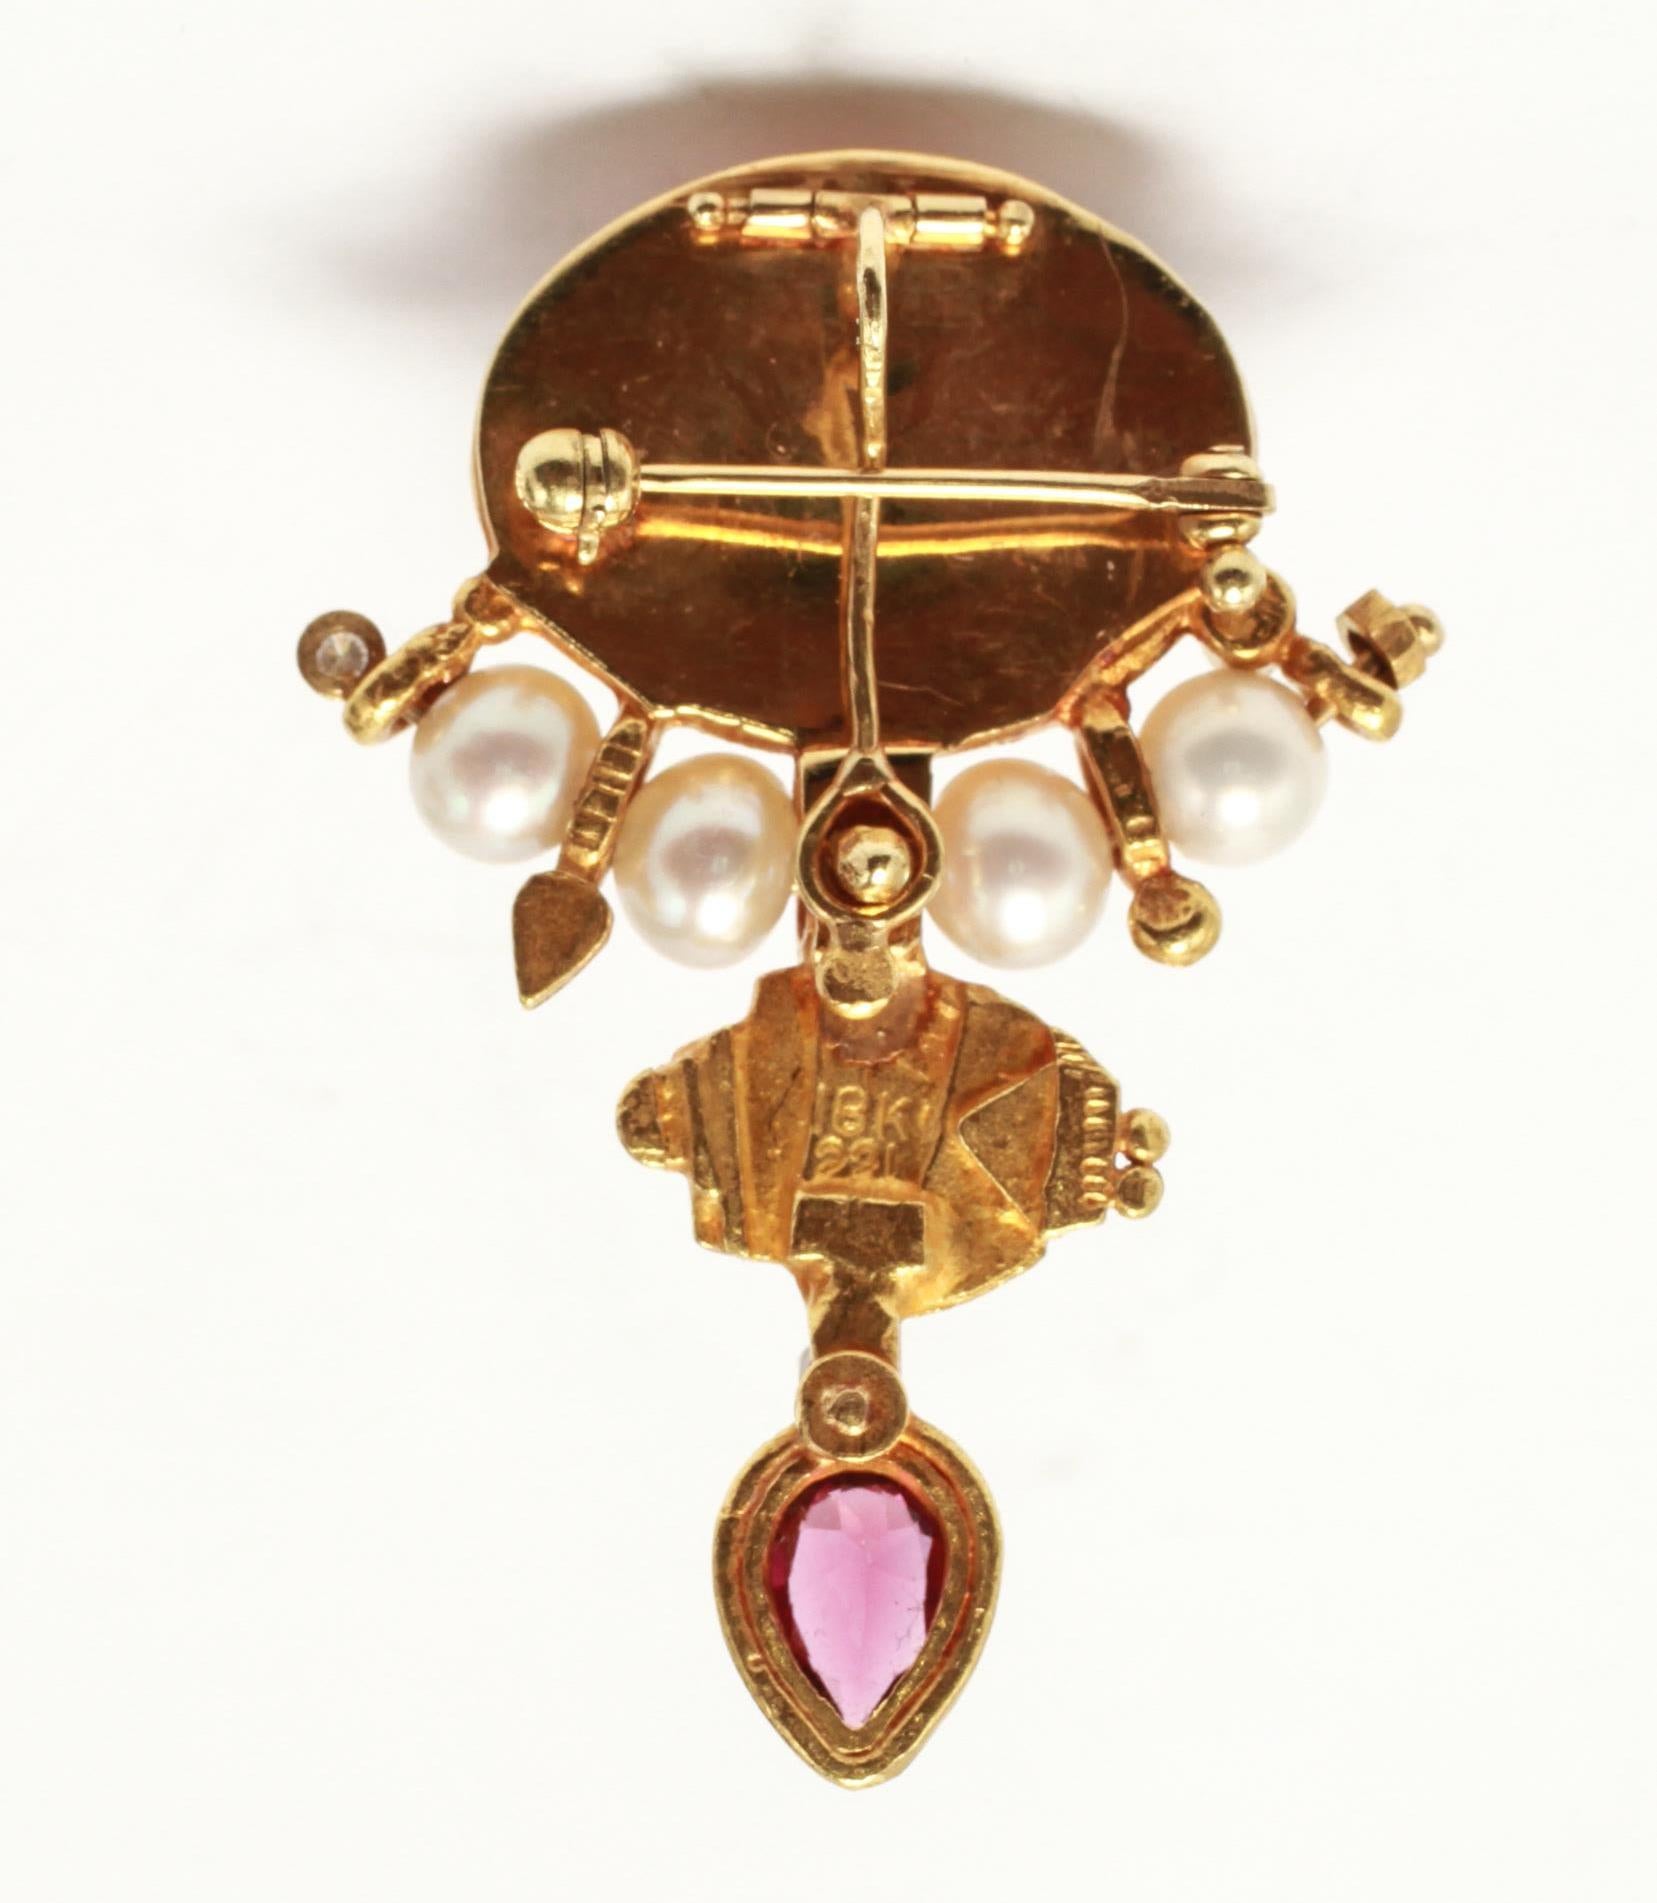 Modern pendant brooch in high karat (22K and 18K) yellow gold with a large cabochon oval rose quartz, pearls, diamonds and a pear-shaped faceted amethyst. The piece is marked on the back: 